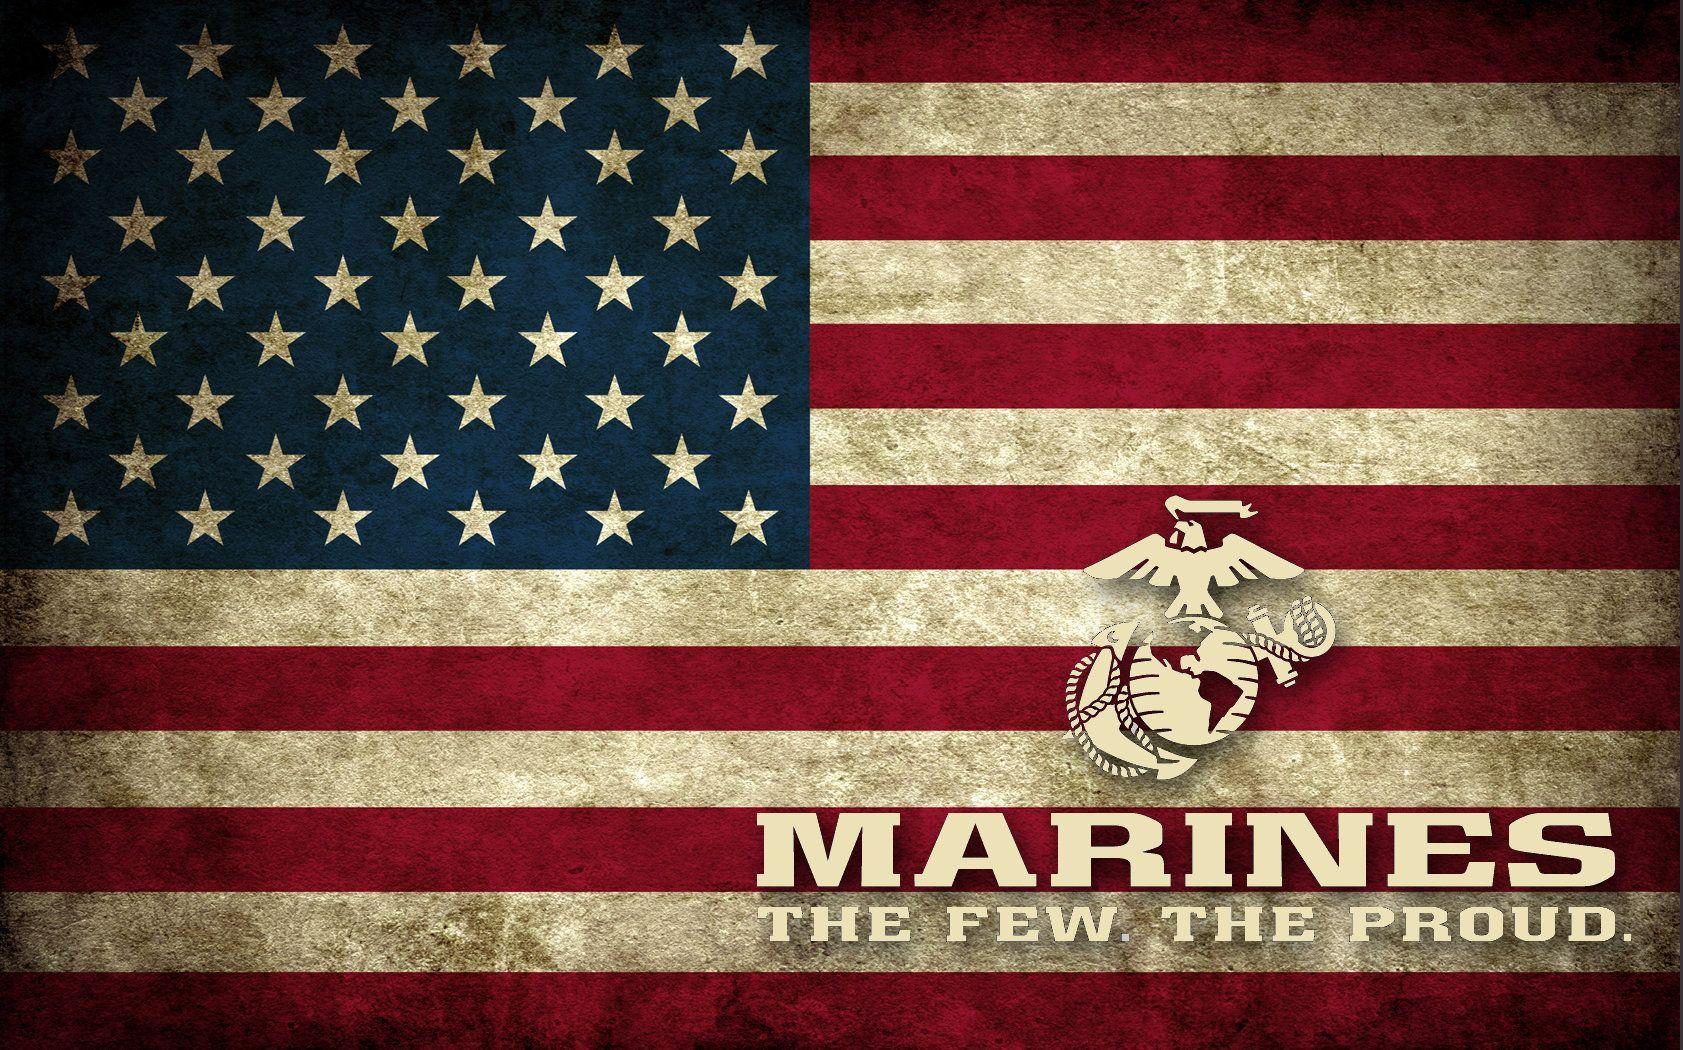 Military United States Marine Corps wallpapers